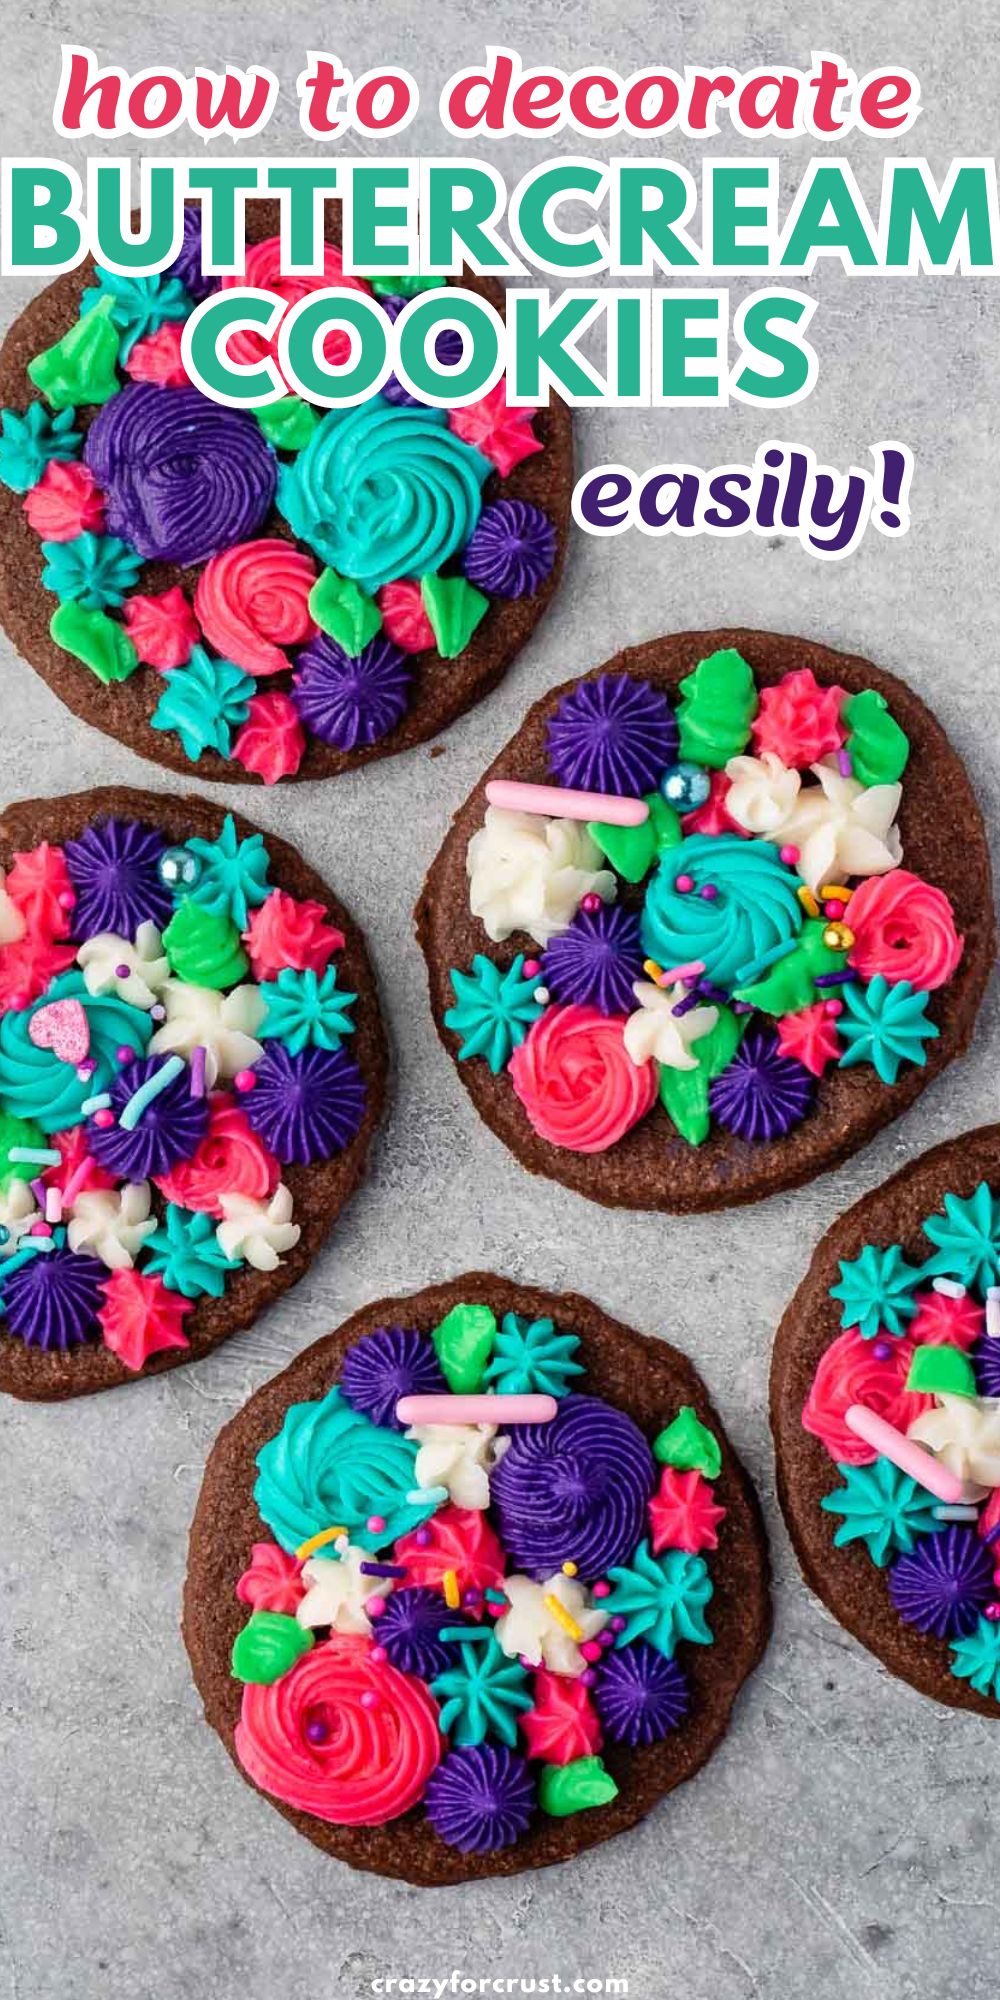 chocolate sugar cookies decorated with bright frosting